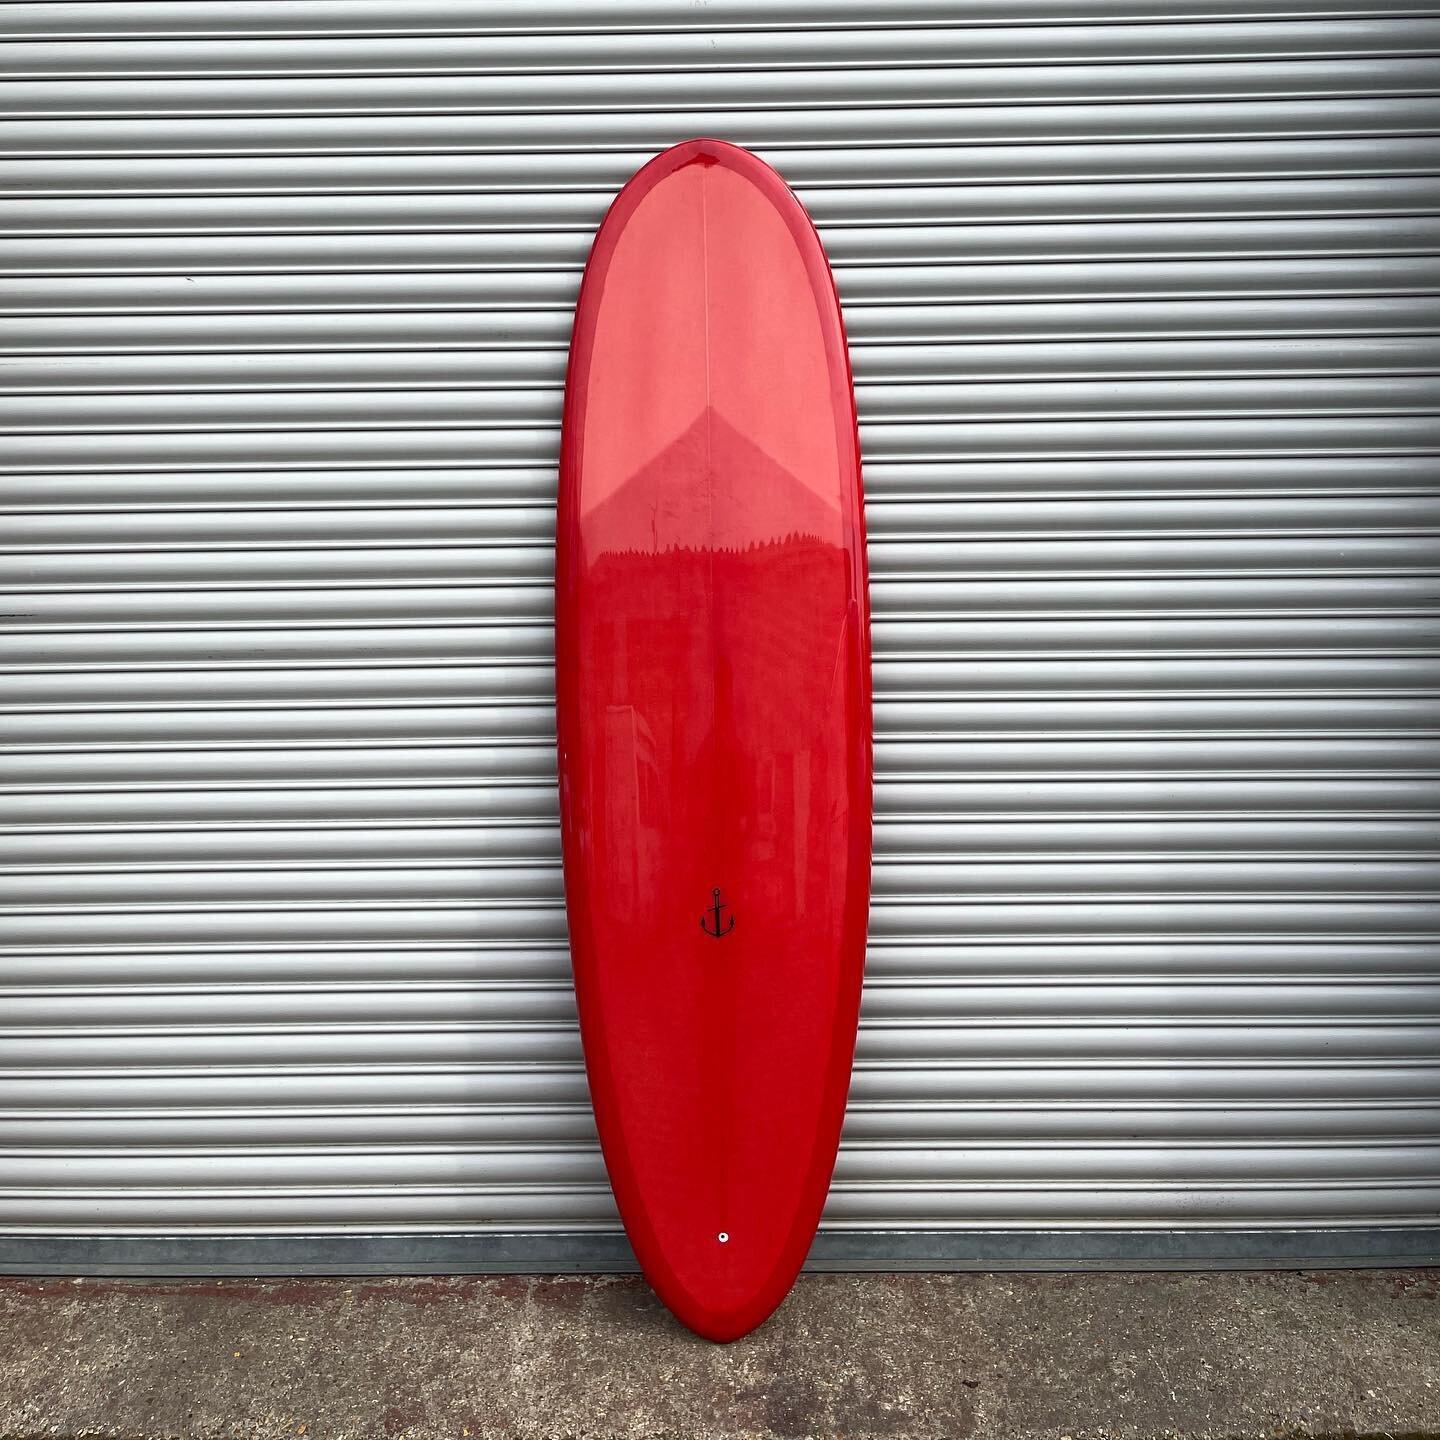 this one&rsquo;s been waxed, finned, leashed and bagged awaiting a suitable moment .. nothing like testing out a new template and rail shape .. slightly edgier than my usual 5050 .. speeding things up 🏁

#ahoysurfcraft #midlength #surfboard #resinti